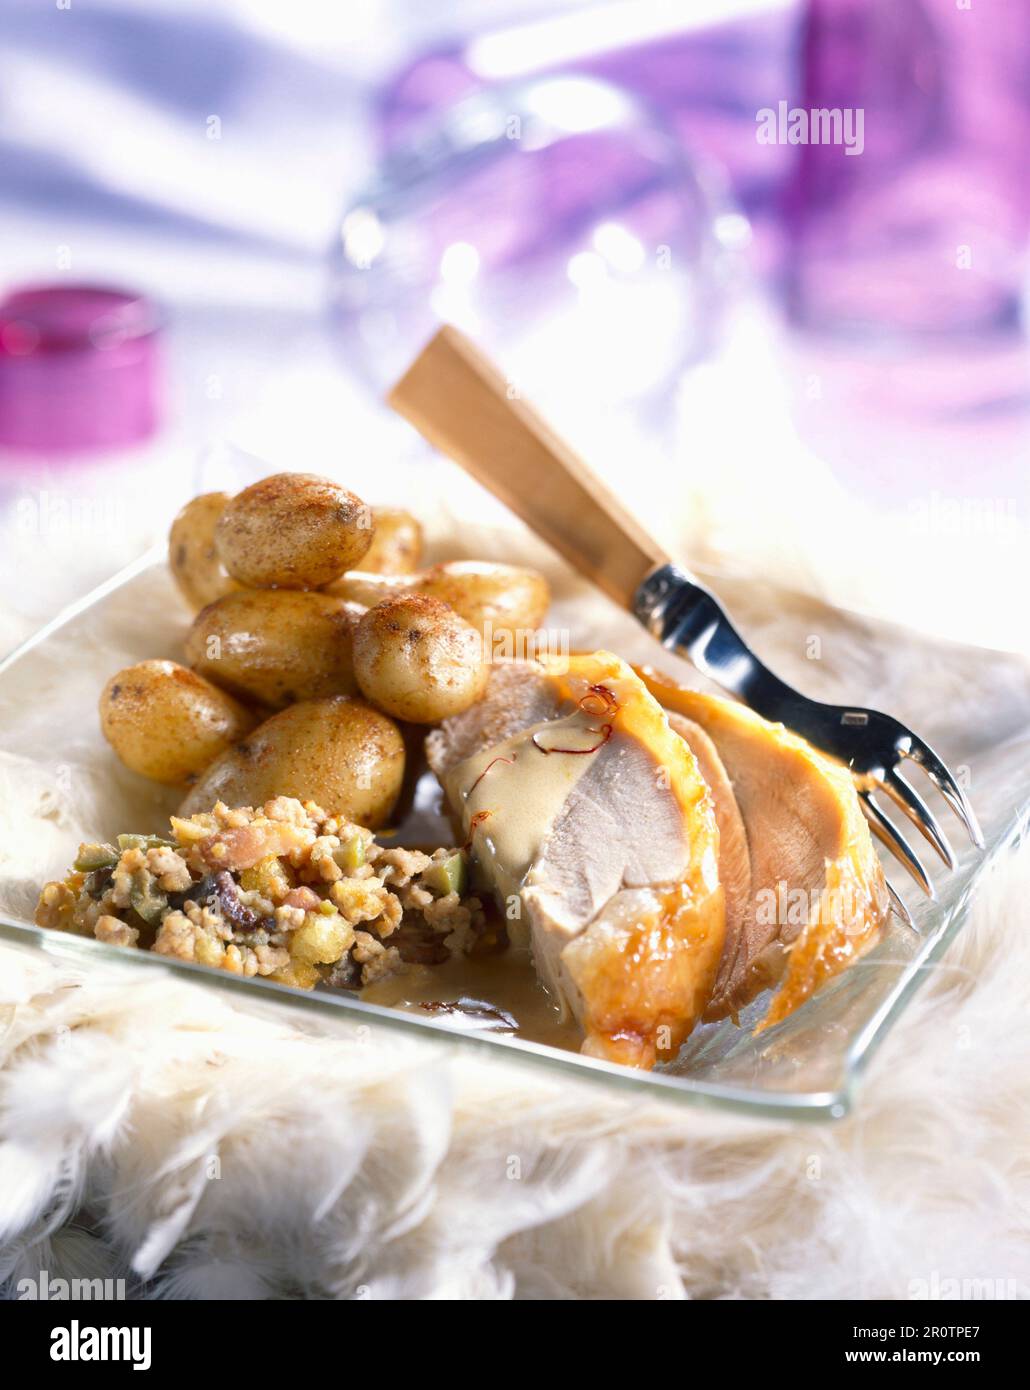 Turkey with dried fruit stuffing and potatoes, saffron sauce Stock Photo